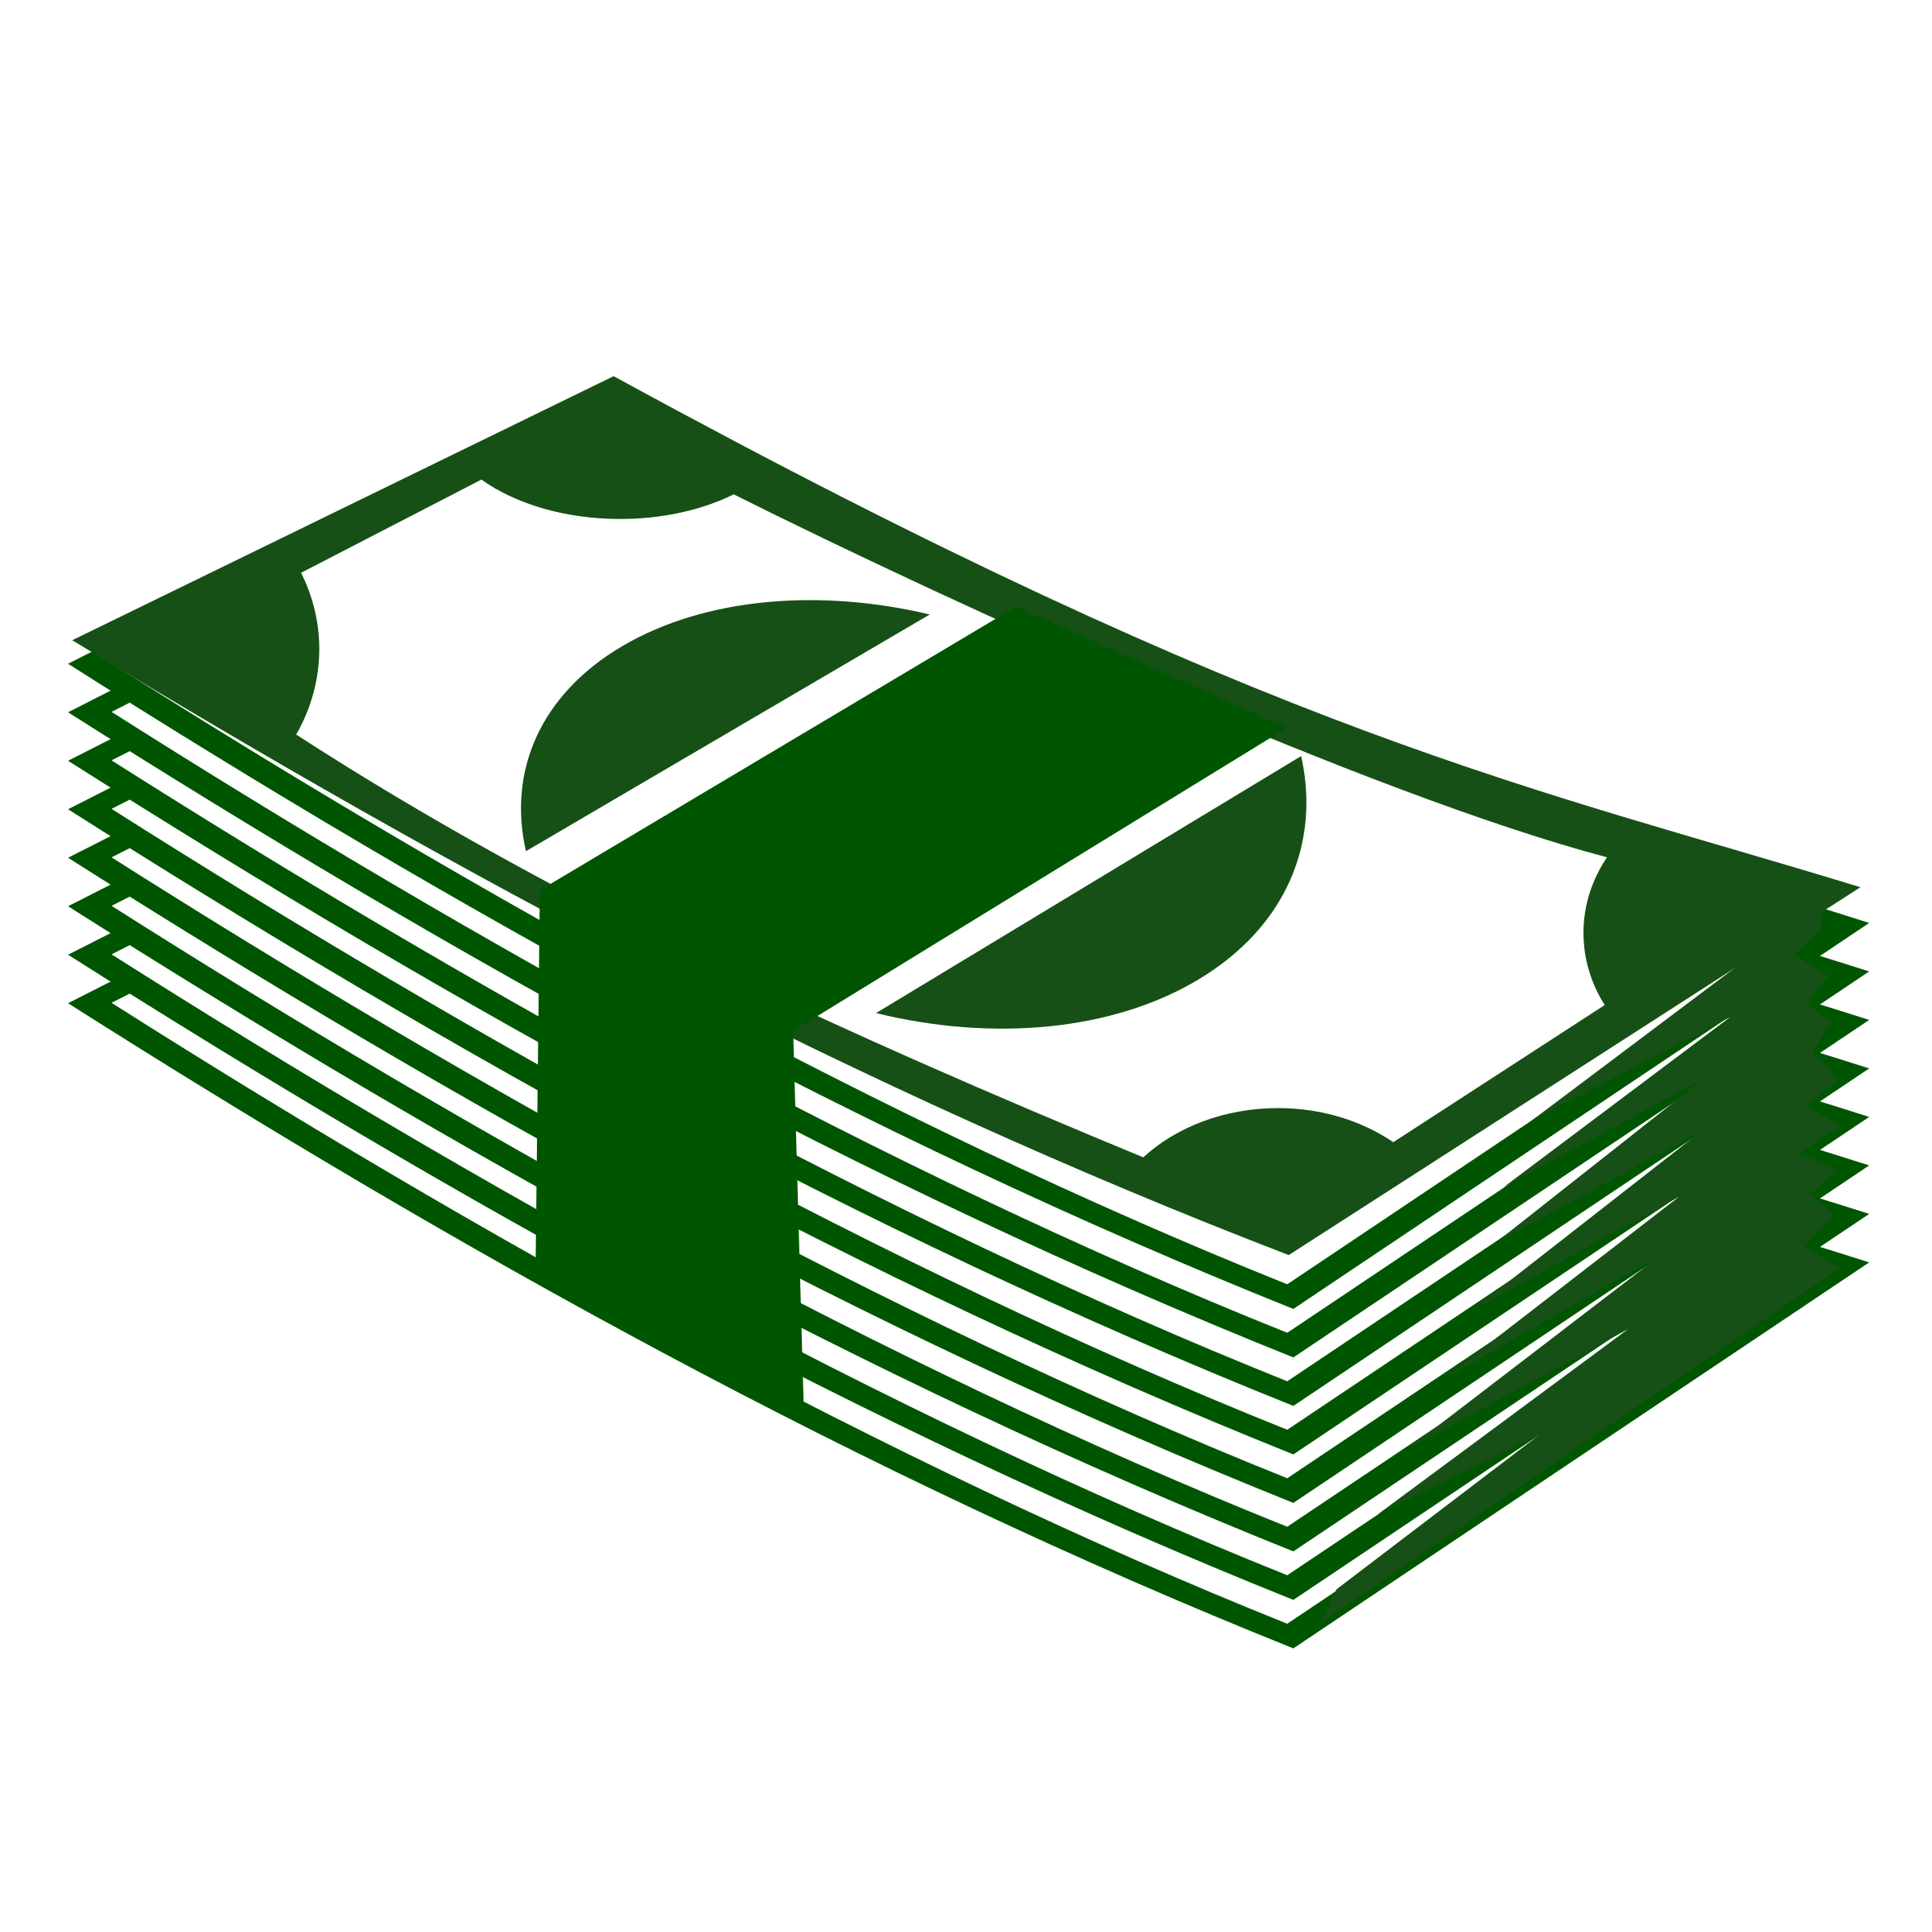 moving money clipart - photo #49